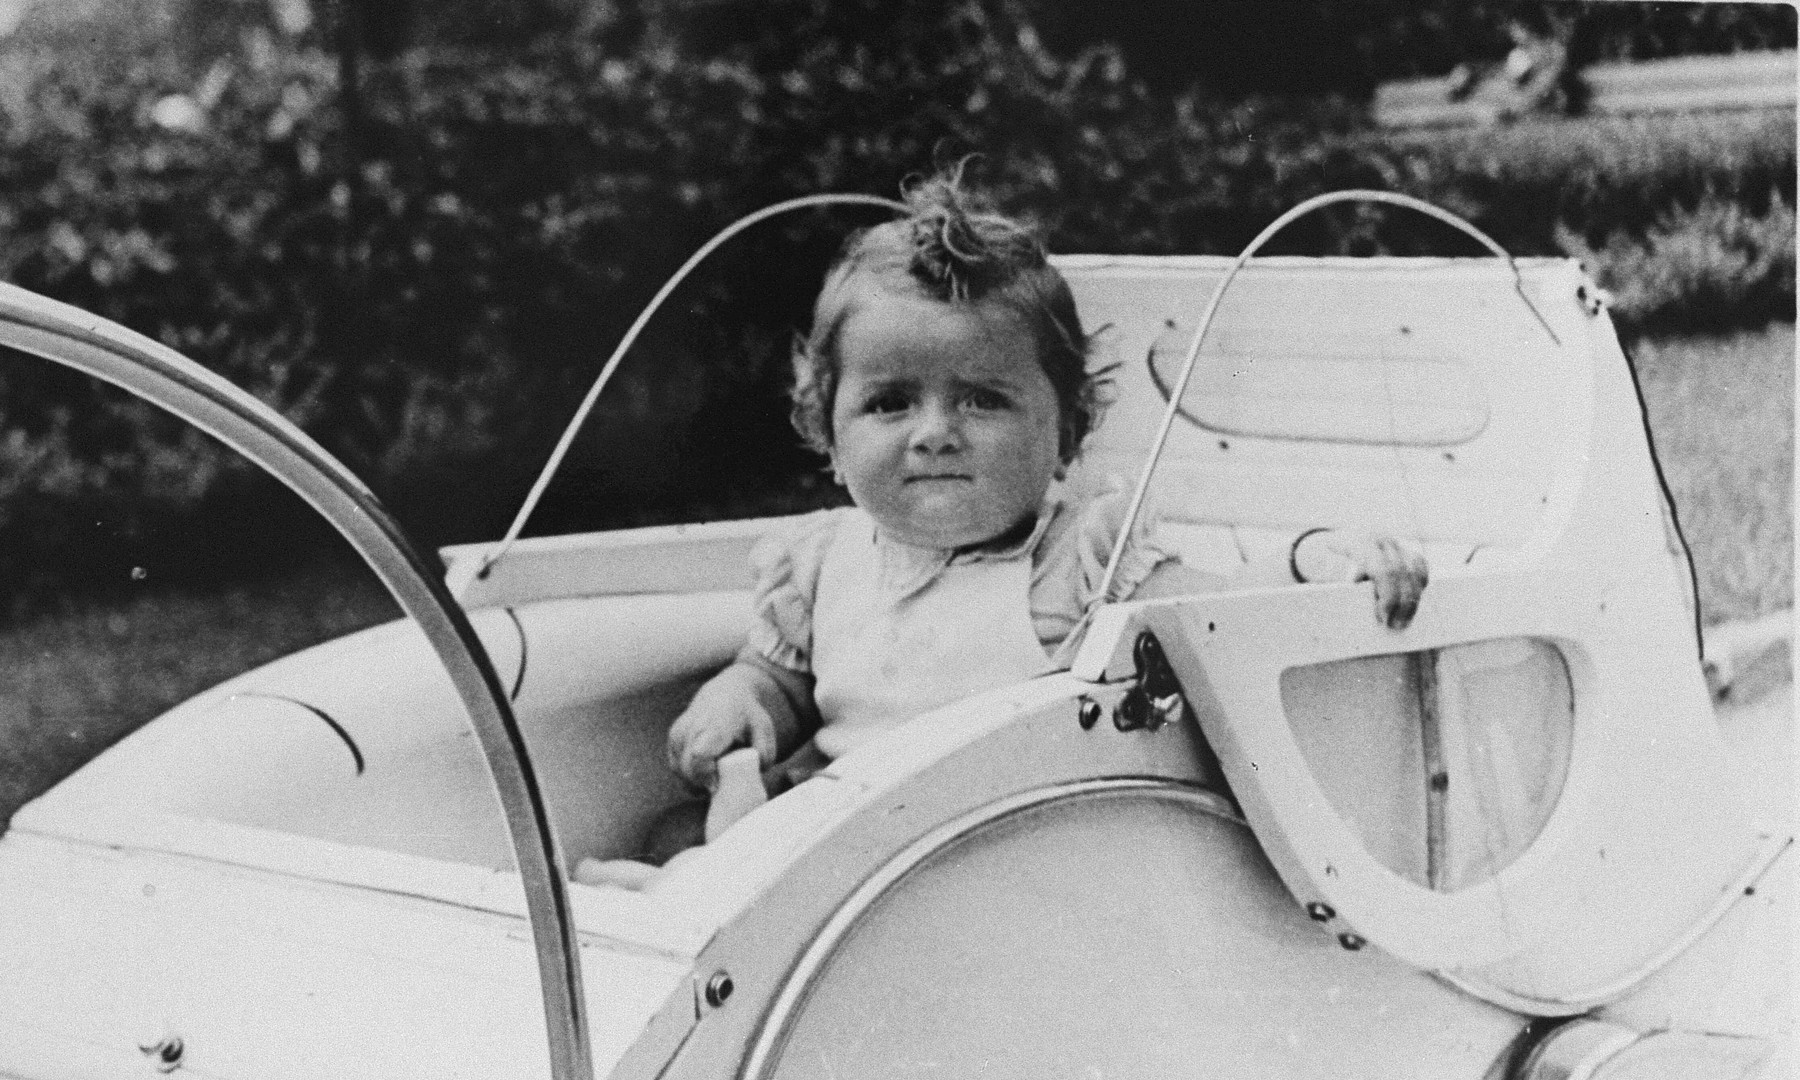 Portrait of a Jewish child sitting in a baby carriage in Zagreb, Croatia.

Pictured is Dita Klein, the daughter of Zdenko Klein and a cousin of the donor.  Dita perished during the Holocaust.